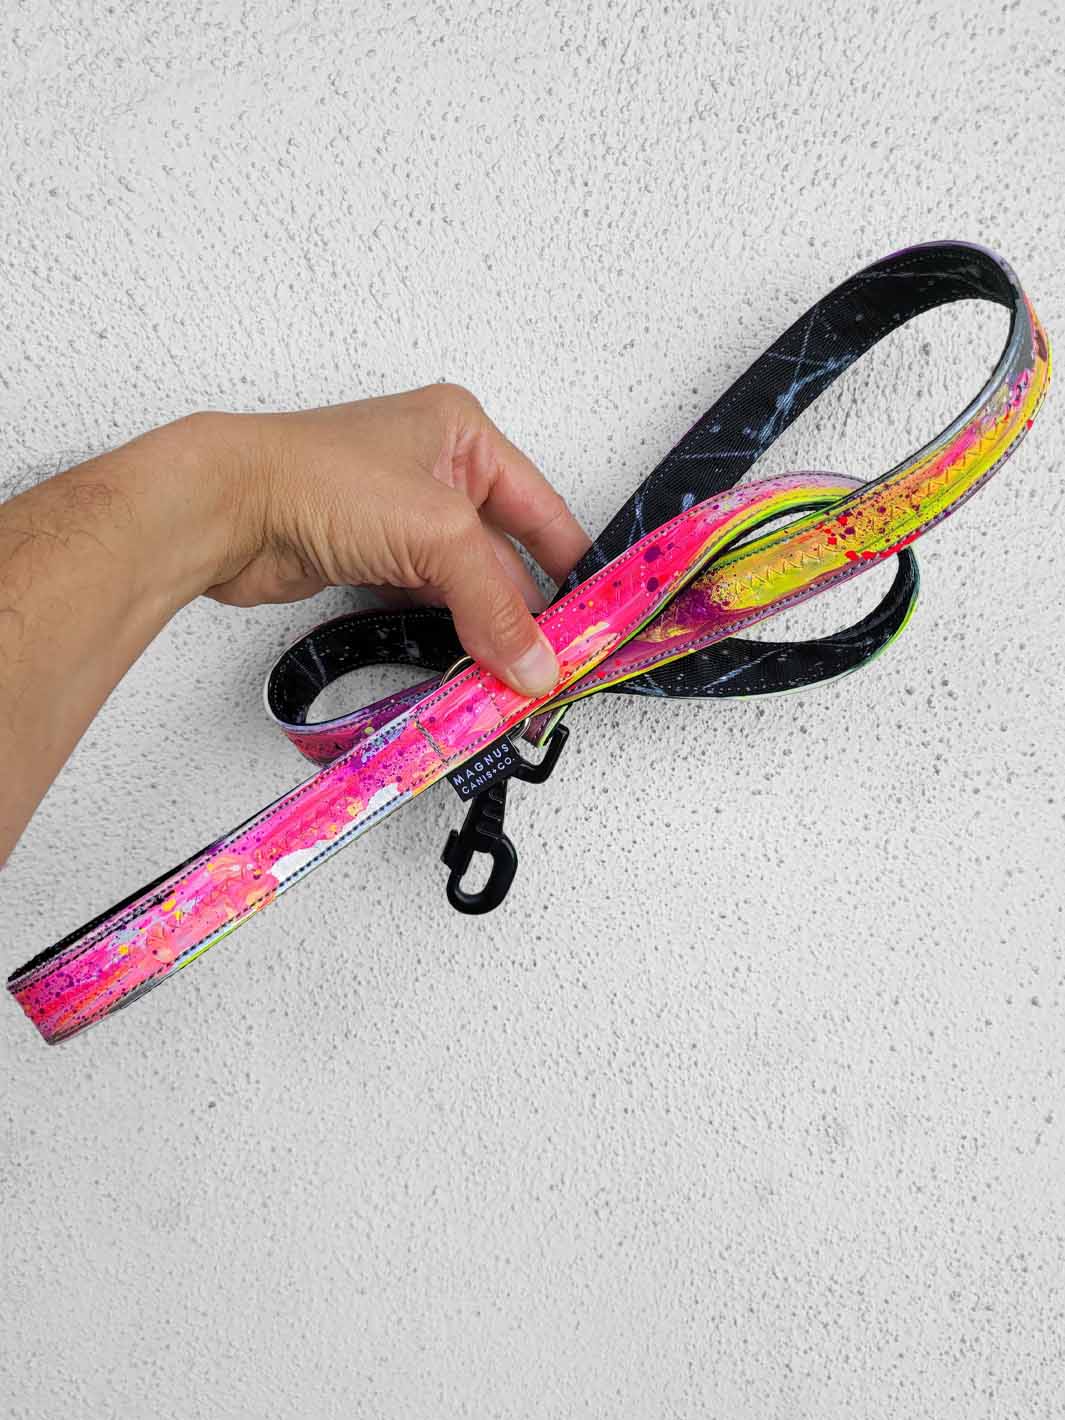 A limited edition hand painted dog leash with multi colored pattern by MAGNUS Canis.